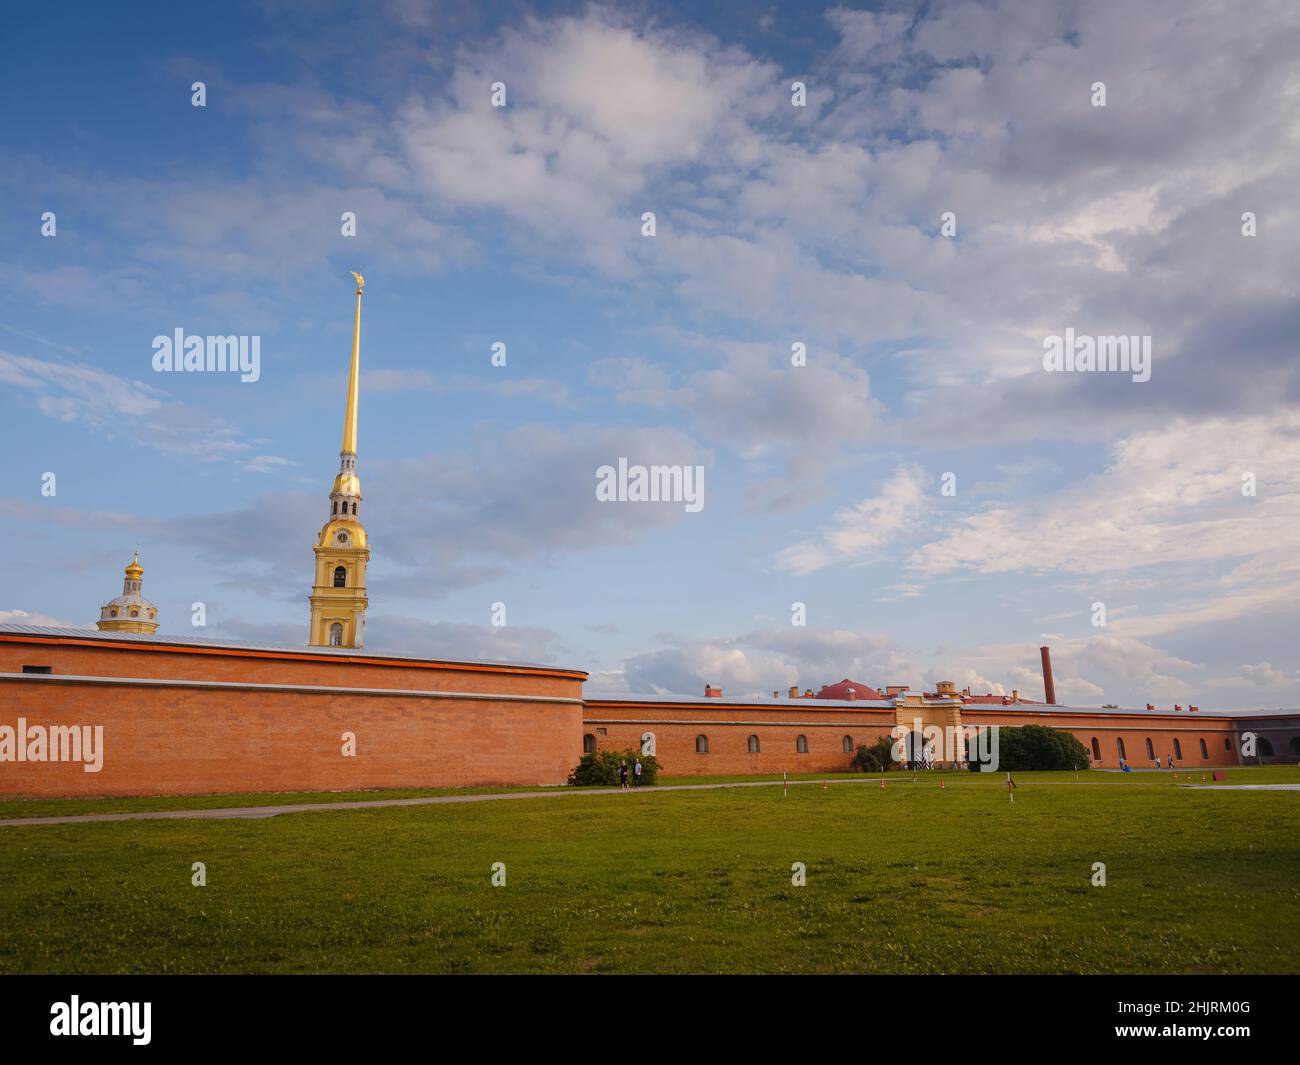 Peter-Pavel's Fortress is oldest architectural monument in St. Petersburg. Located on Hare Island, in St. Petersburg, the historical core of city. Stock Photo